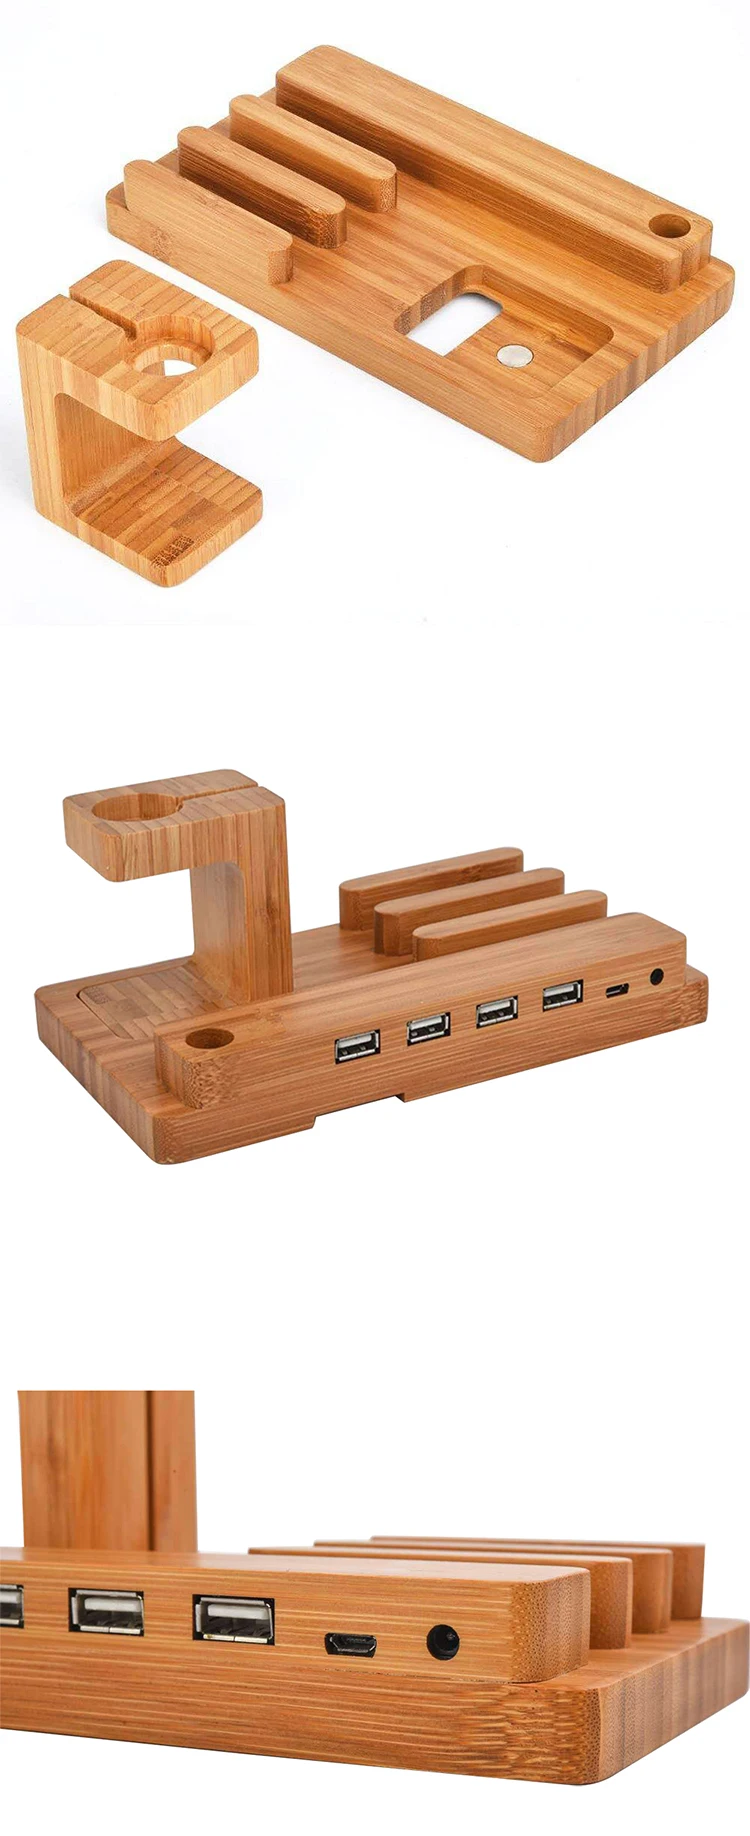 Wooden Mobile Phone Watch Charger Holders Stand Charging Dock Station Tablet Desk Holder Support Natural Bamboo Universal CN;GUA